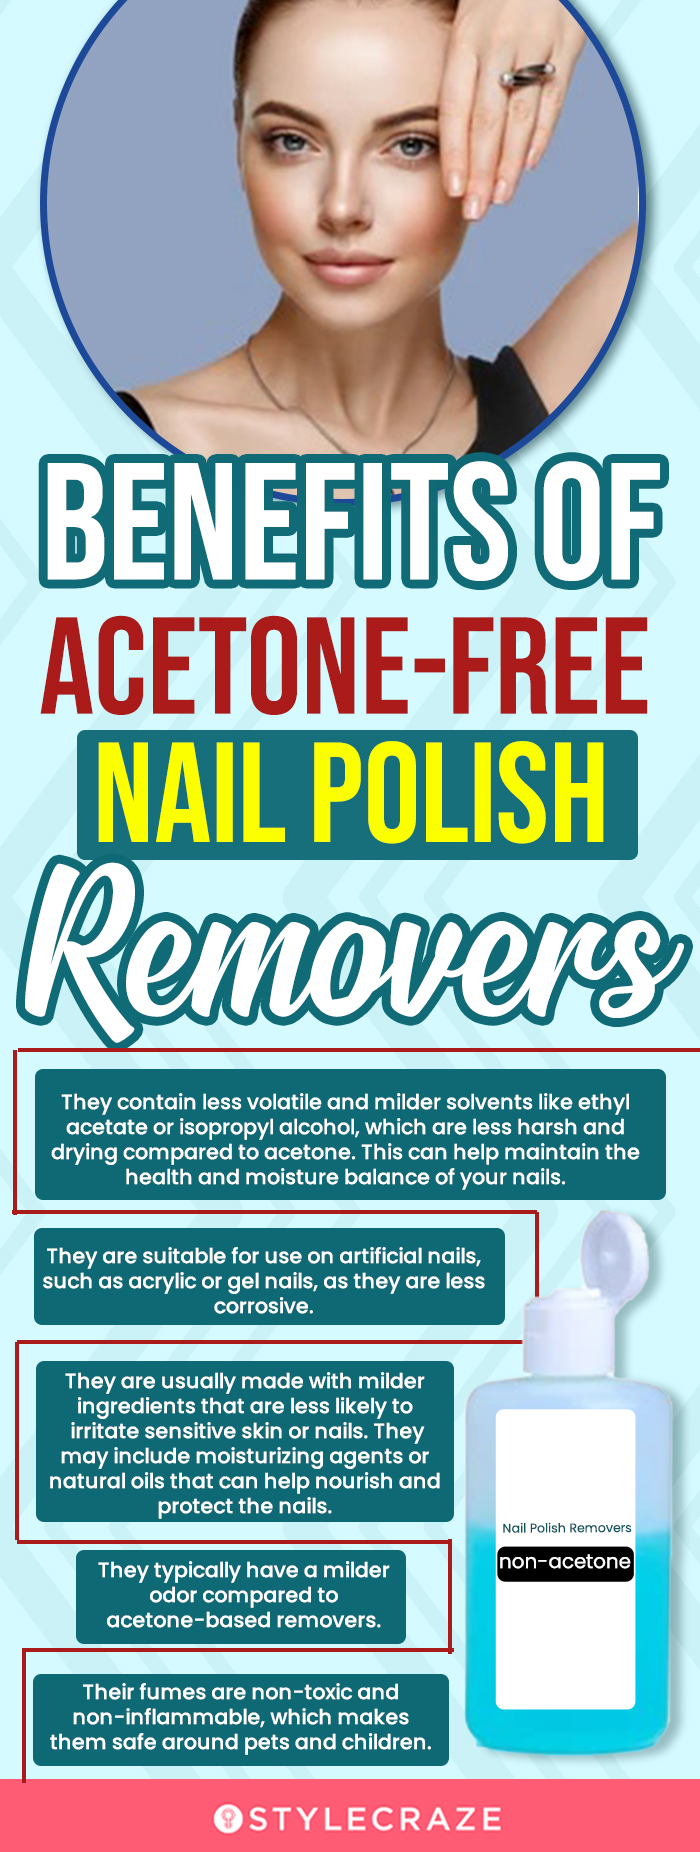 Benefits Of Acetone-Free Nail Polish Removers (infographic)